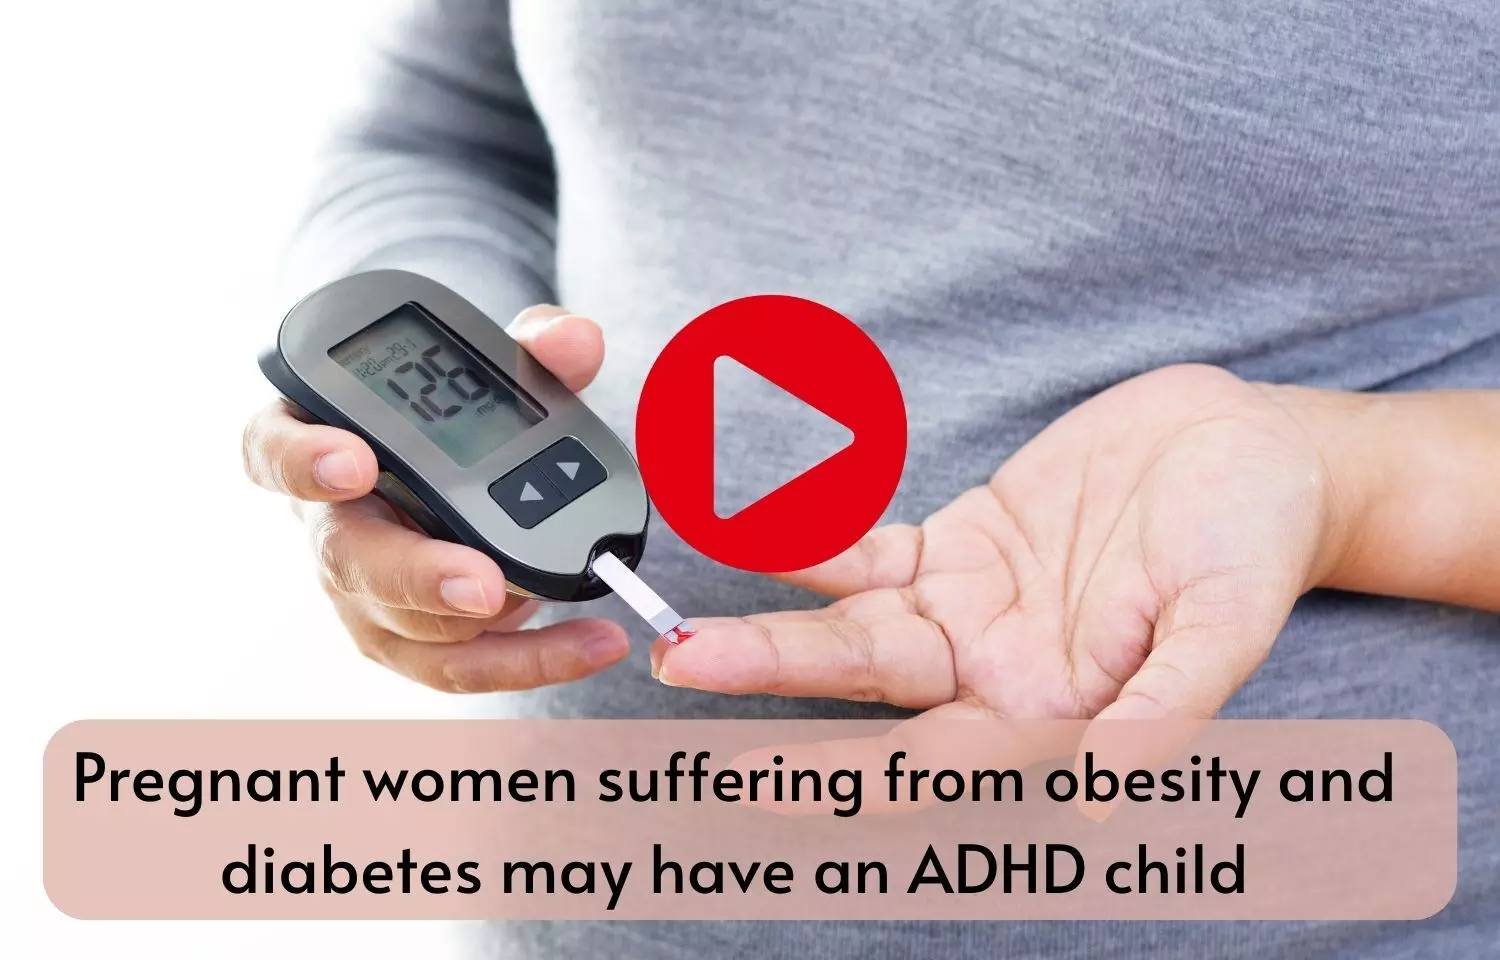 Pregnant women suffering from obesity and diabetes may have an ADHD child